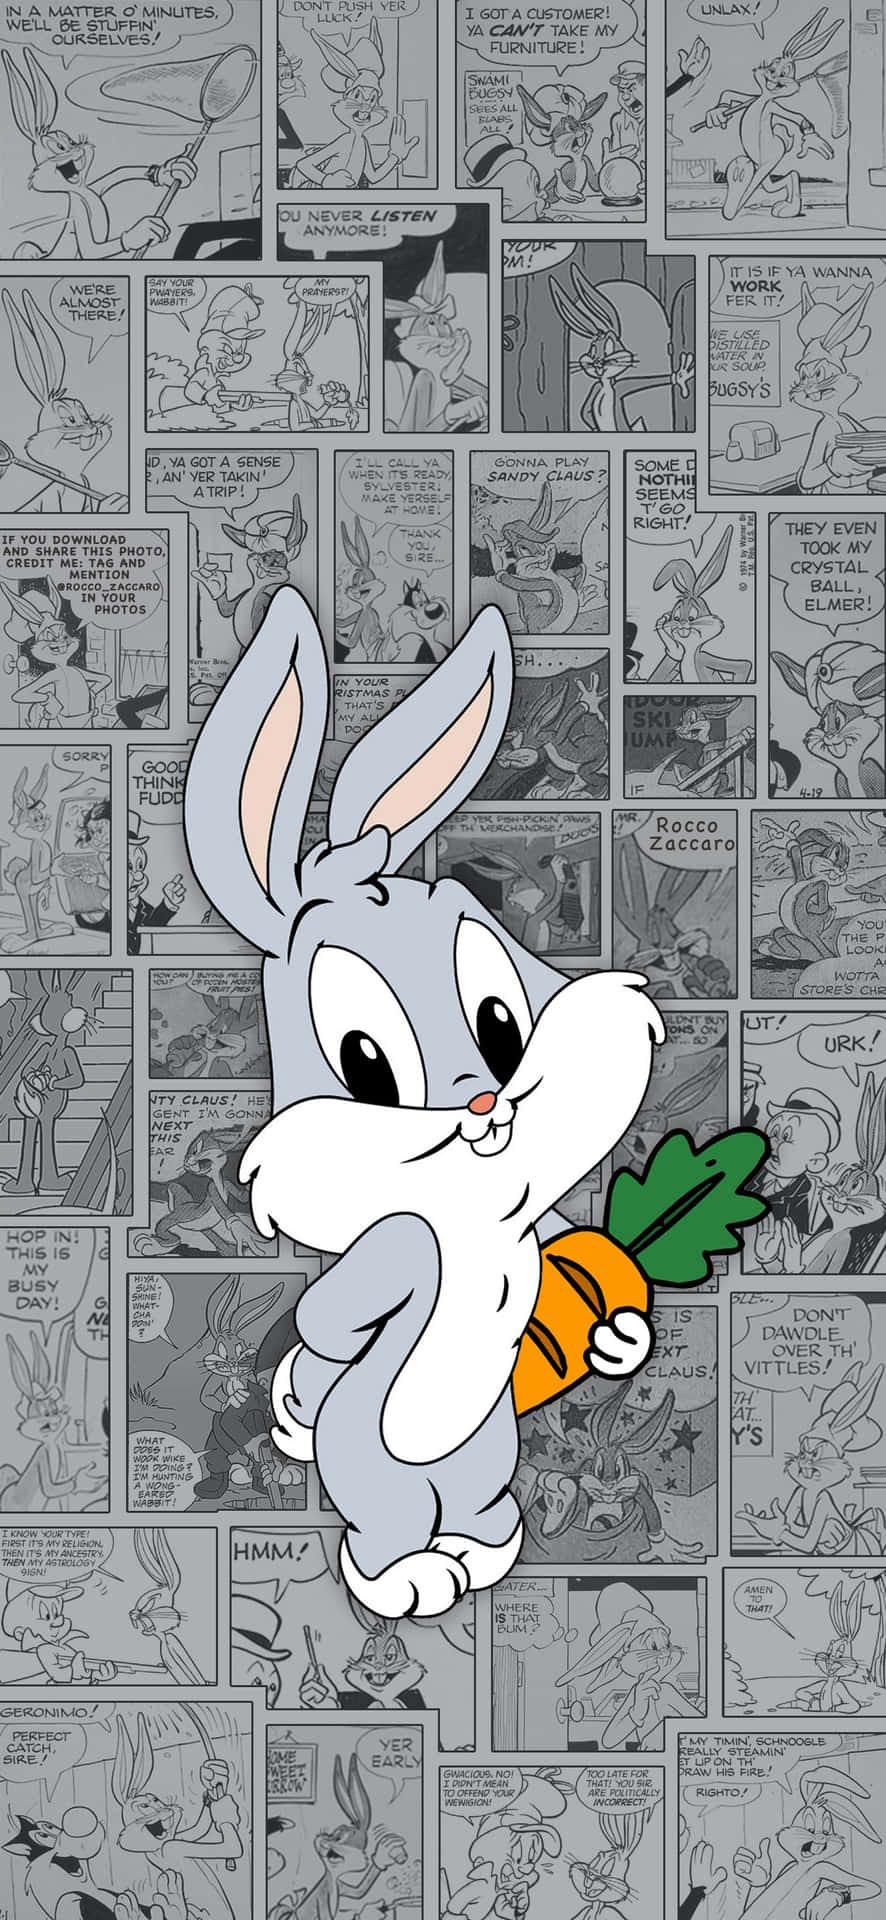 IPhone wallpaper of bugs bunny holding a carrot - Looney Tunes, Bugs Bunny